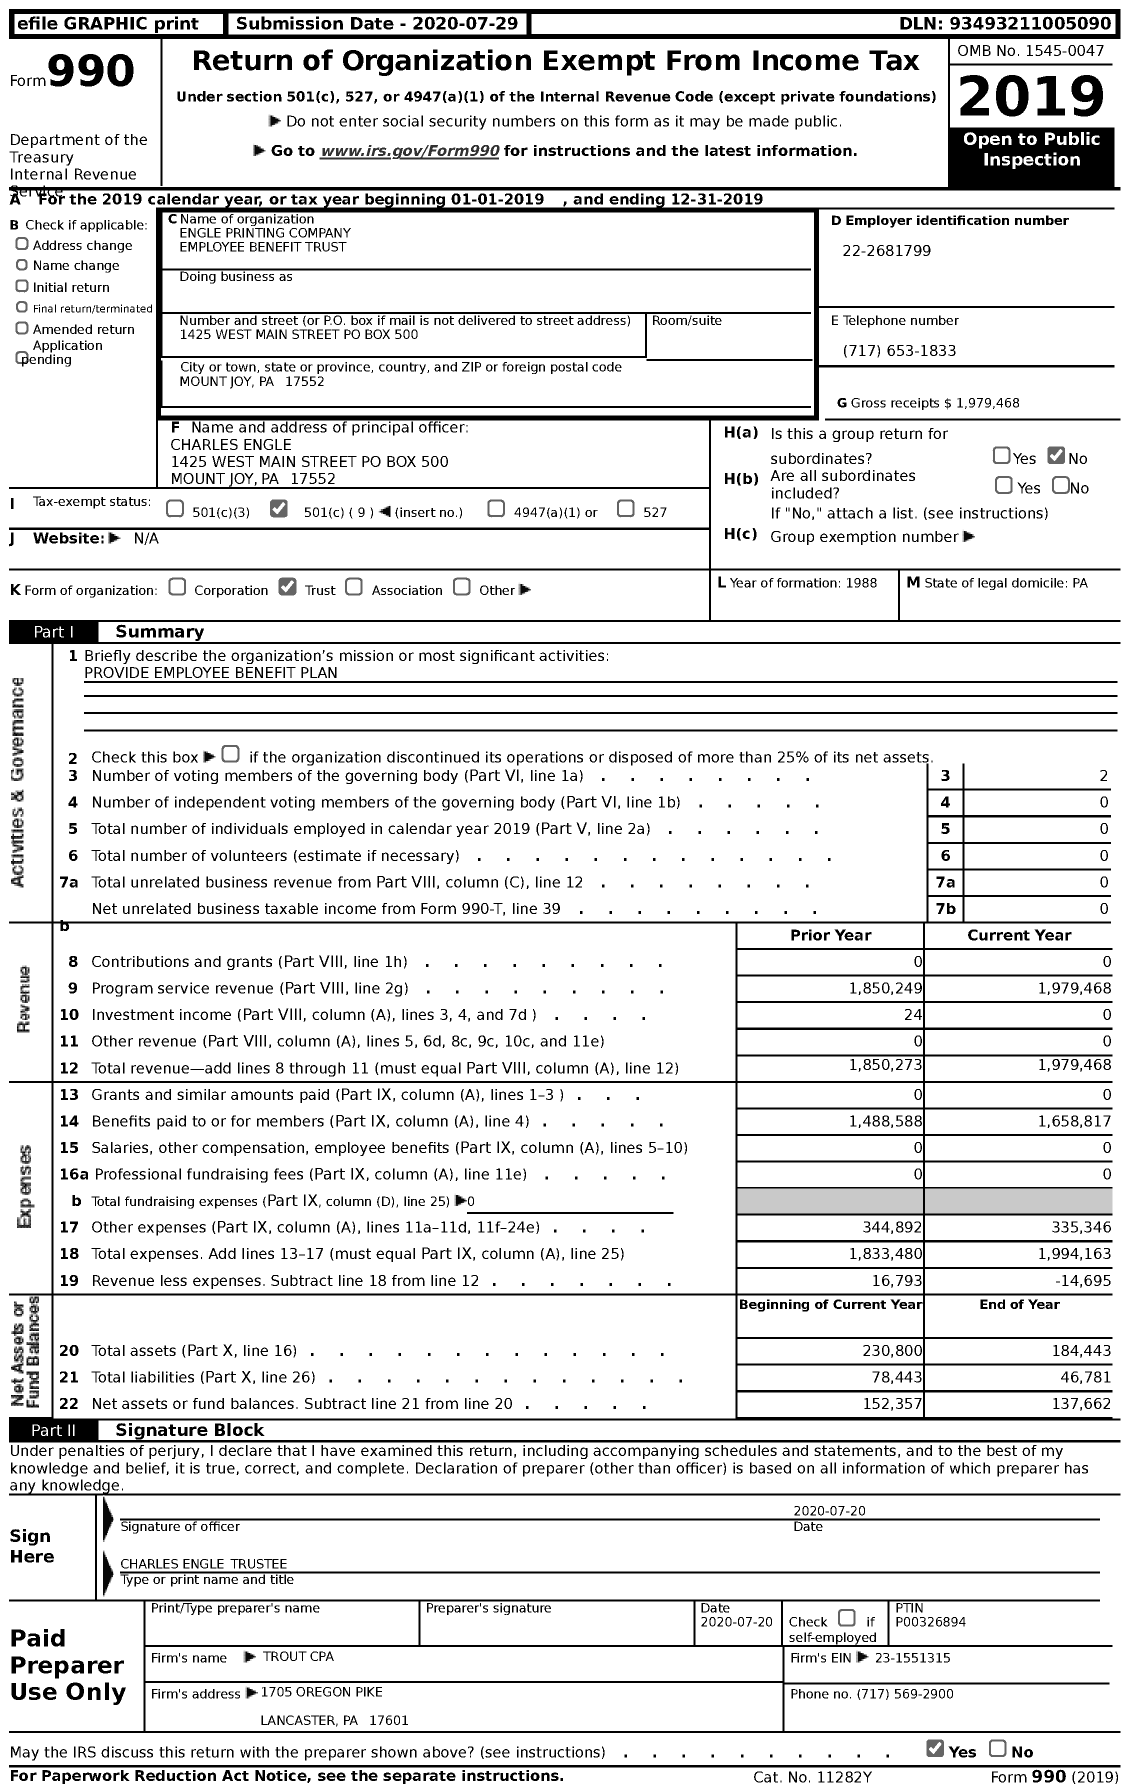 Image of first page of 2019 Form 990 for Engle Printing Company Employee Benefit Trust